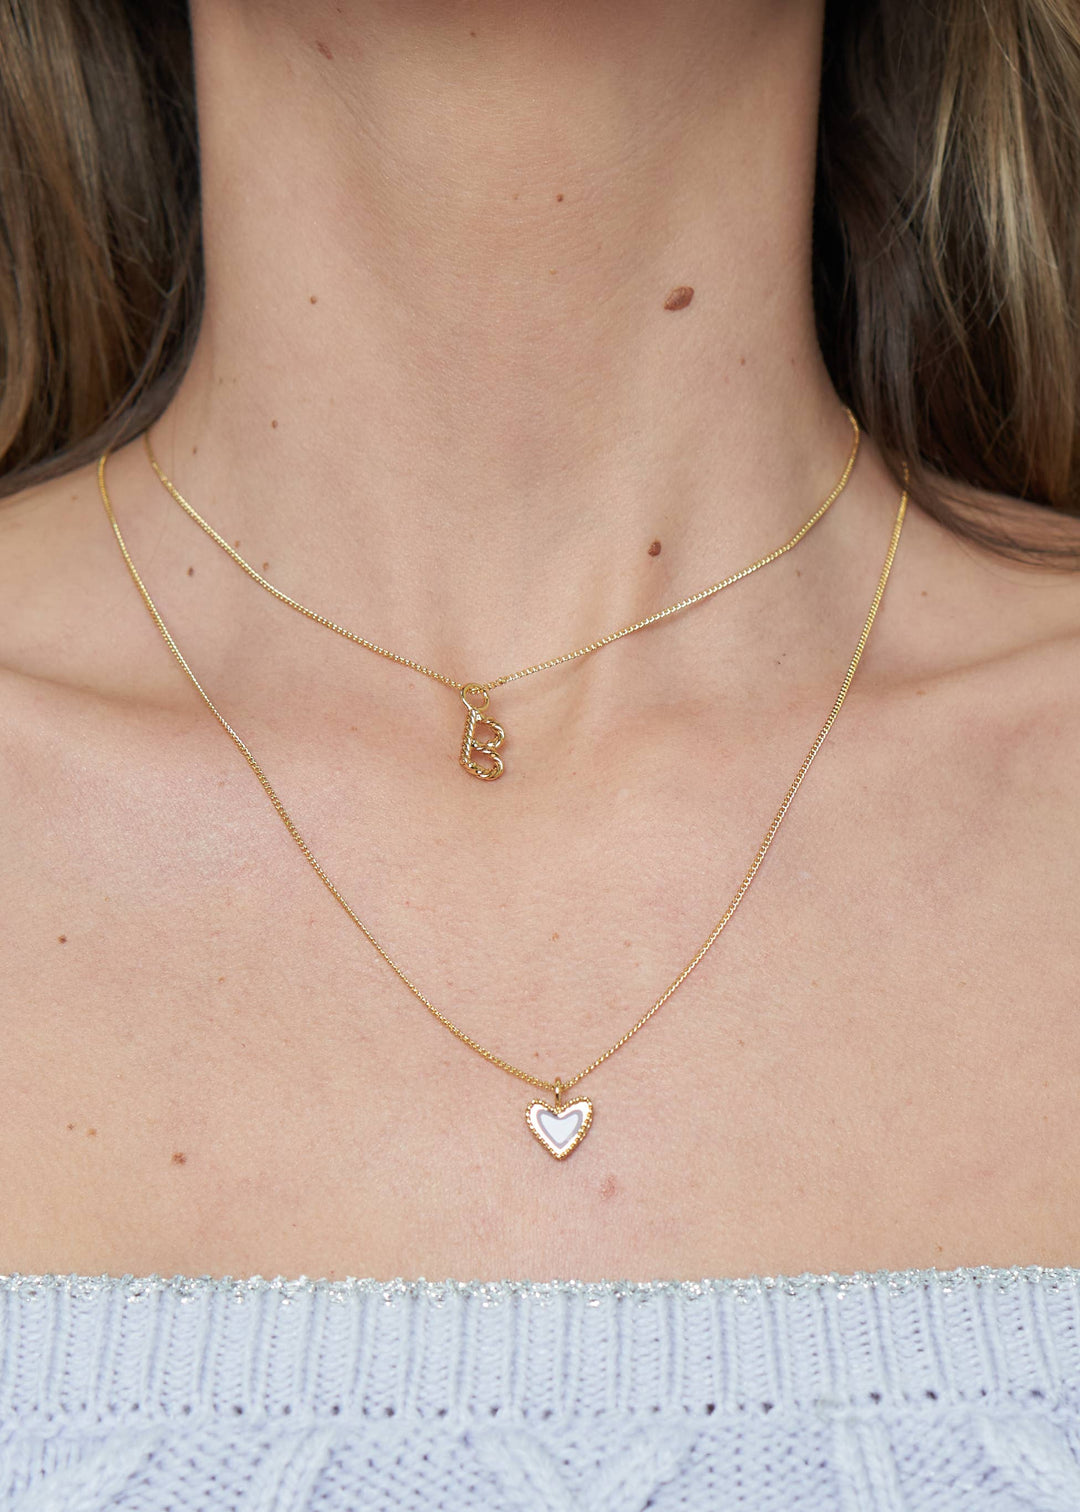 Aspen Initial Mini Necklace: Holiday Favorite!: D / 14"+3"